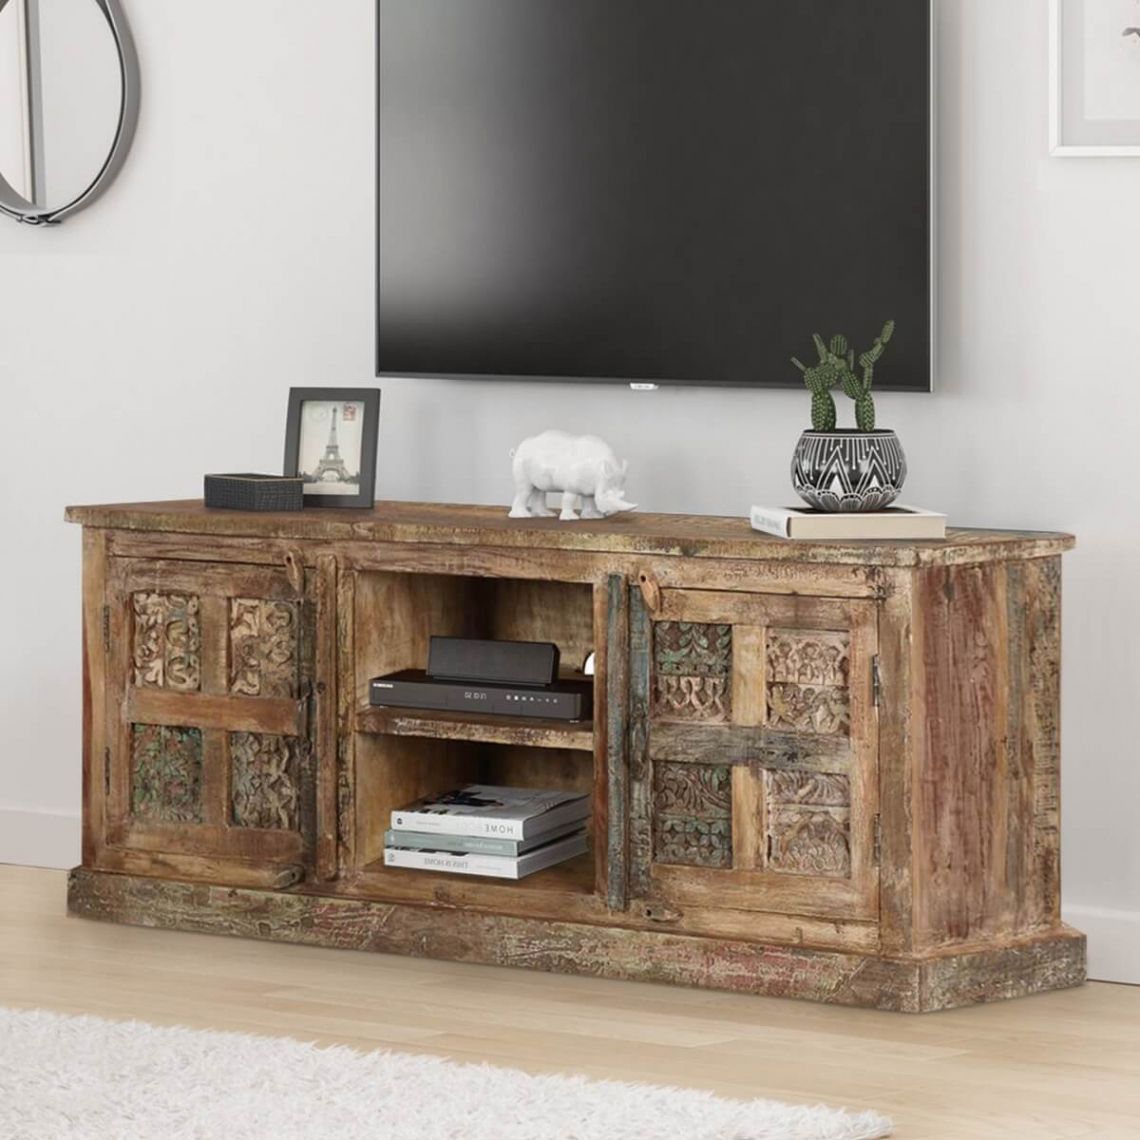 Lovely Distressed Wood Tv Stand | Ch20 Webmaster Intended For Wooden Tv Stands (Photo 9 of 15)